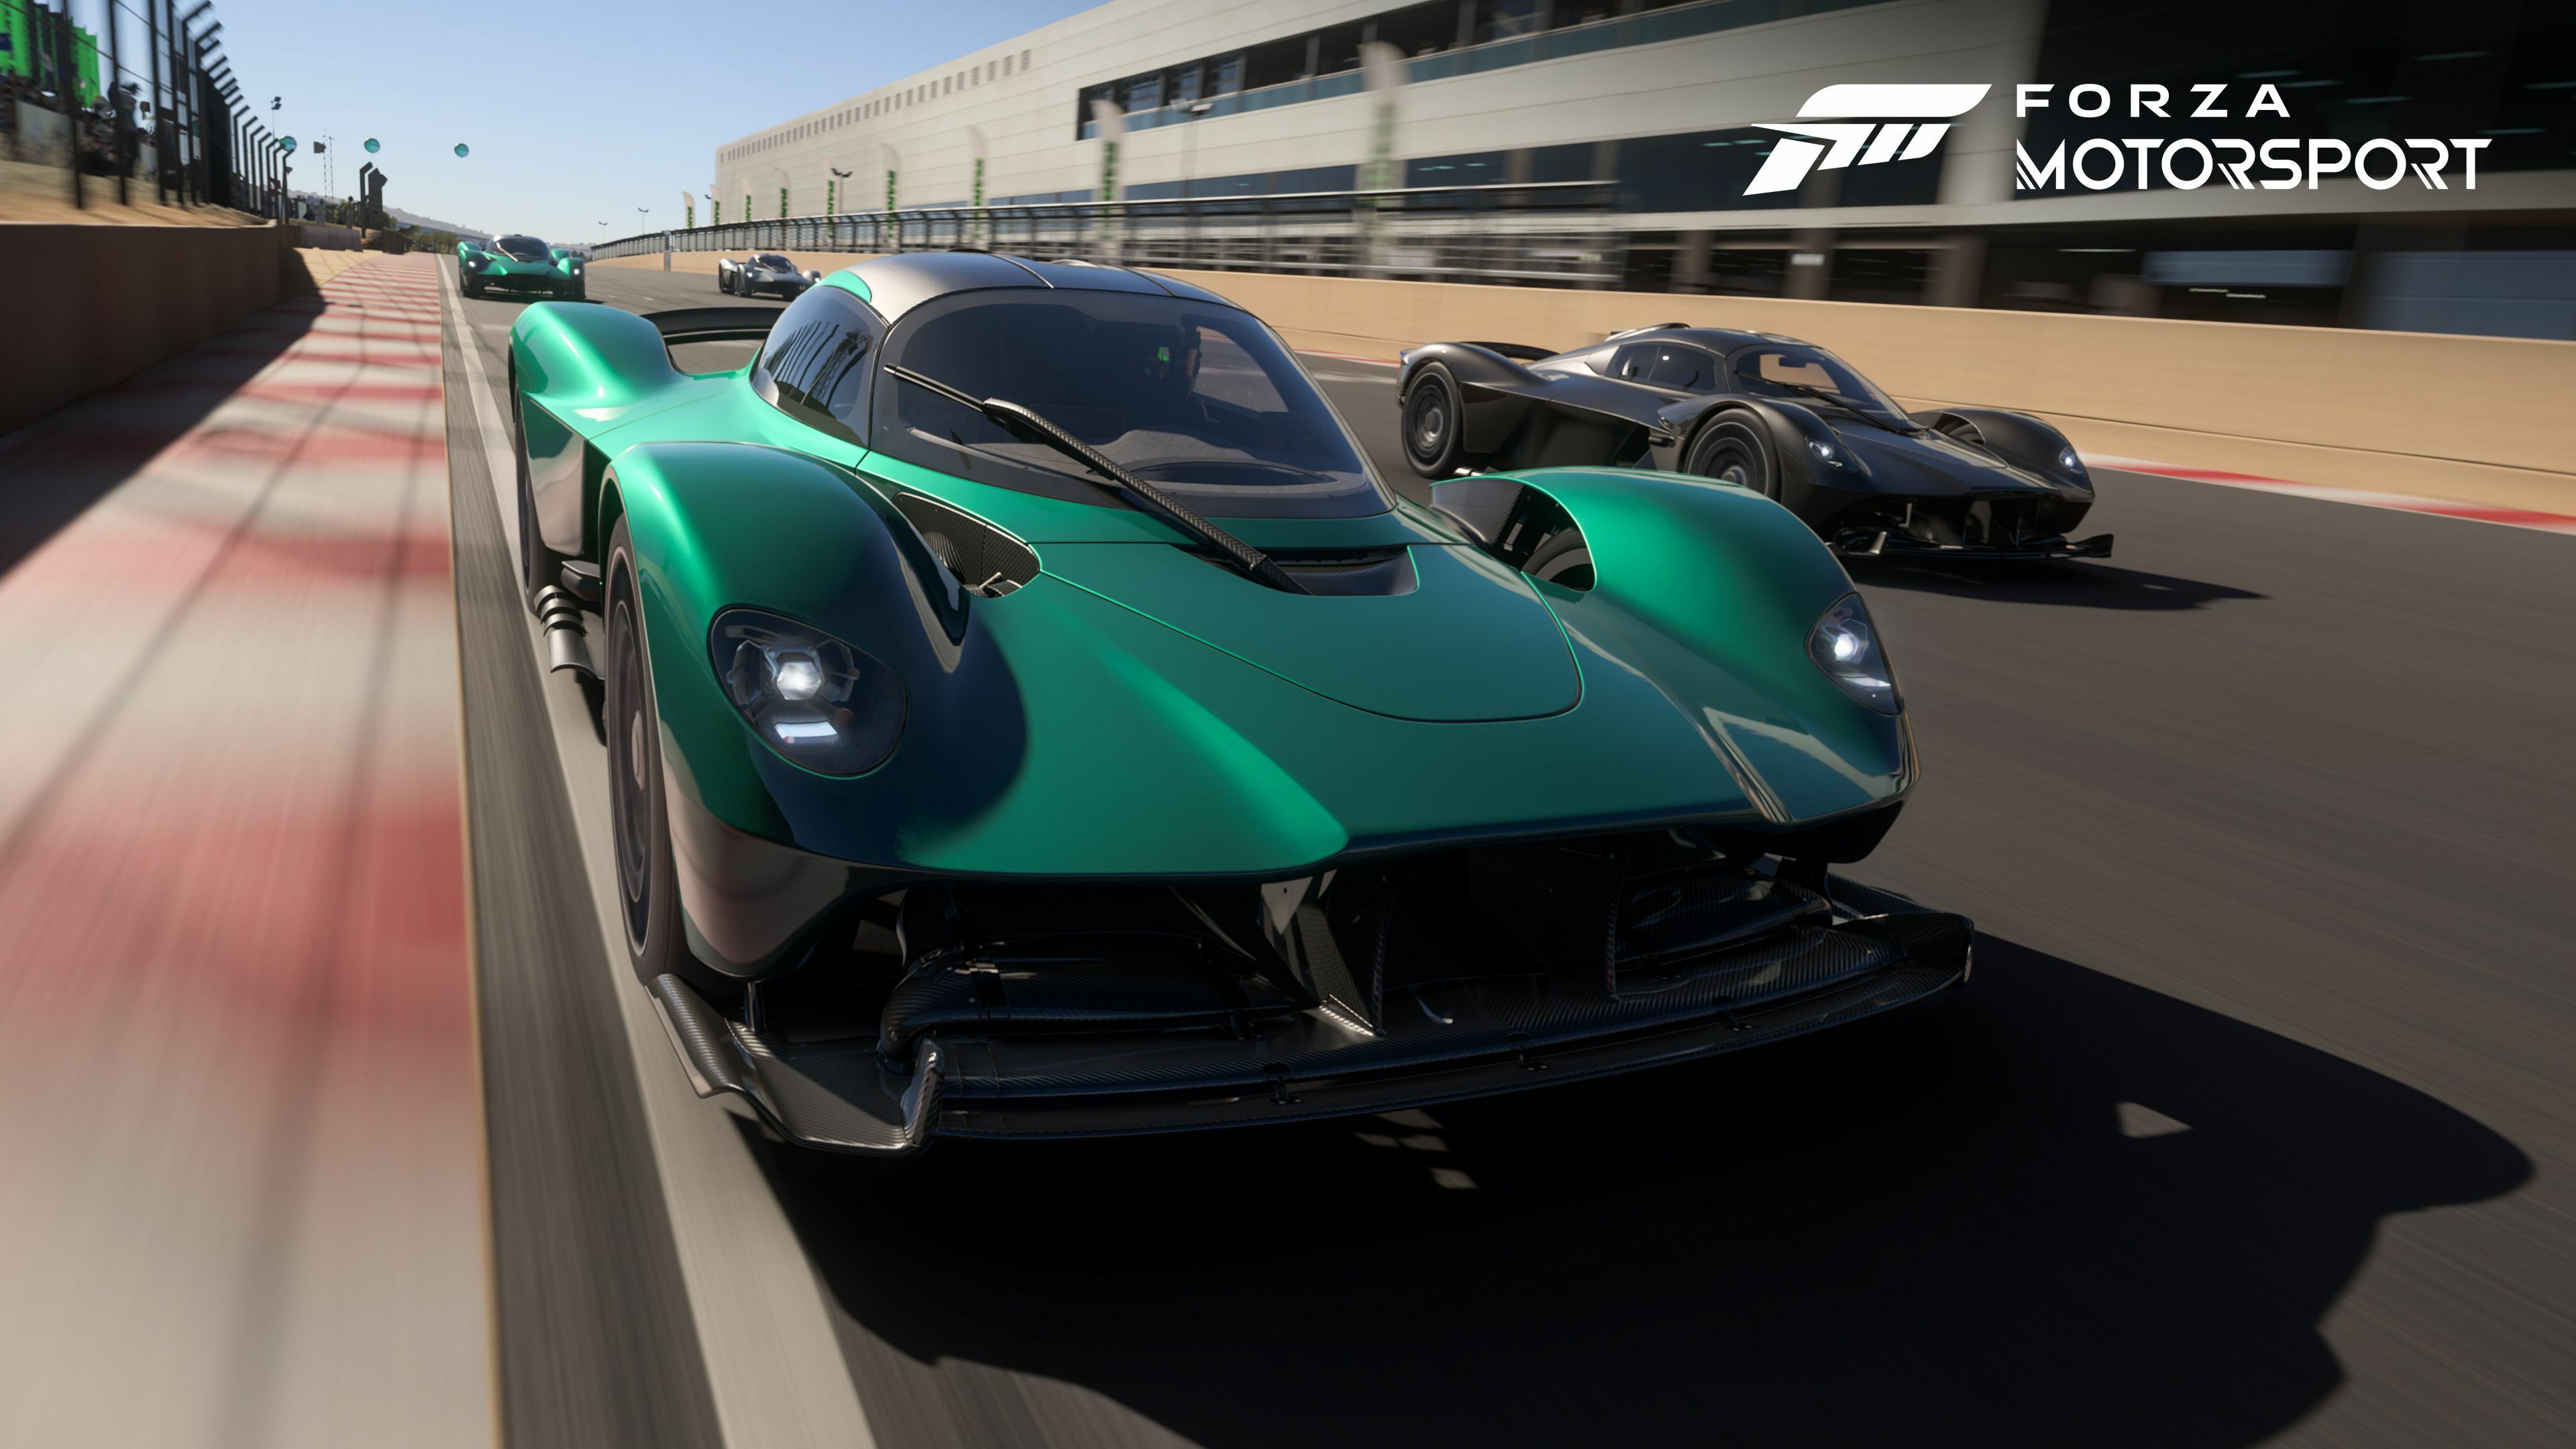 Forza Motorsport Update 3 Out Now: Hockenheimring, Contemporary